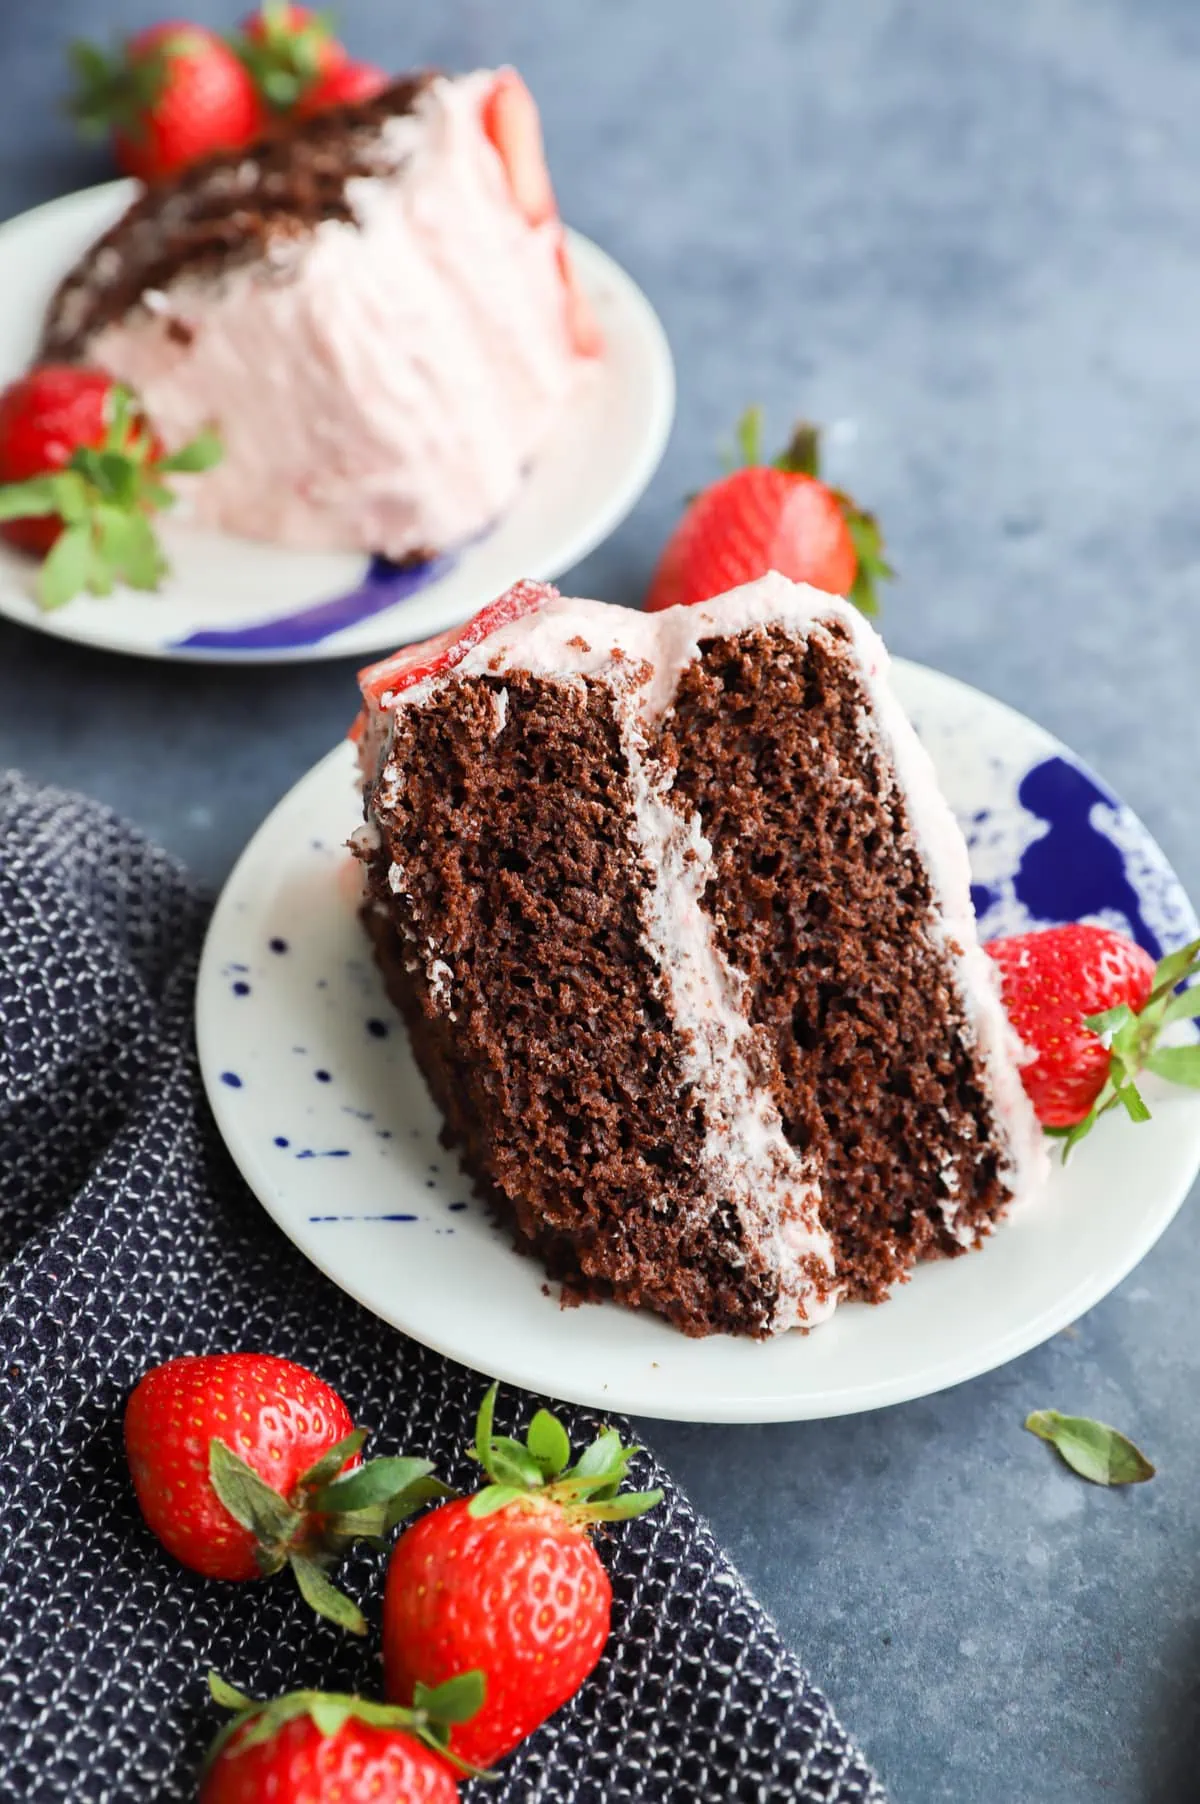 Picture of chocolate cake on plate with strawberries